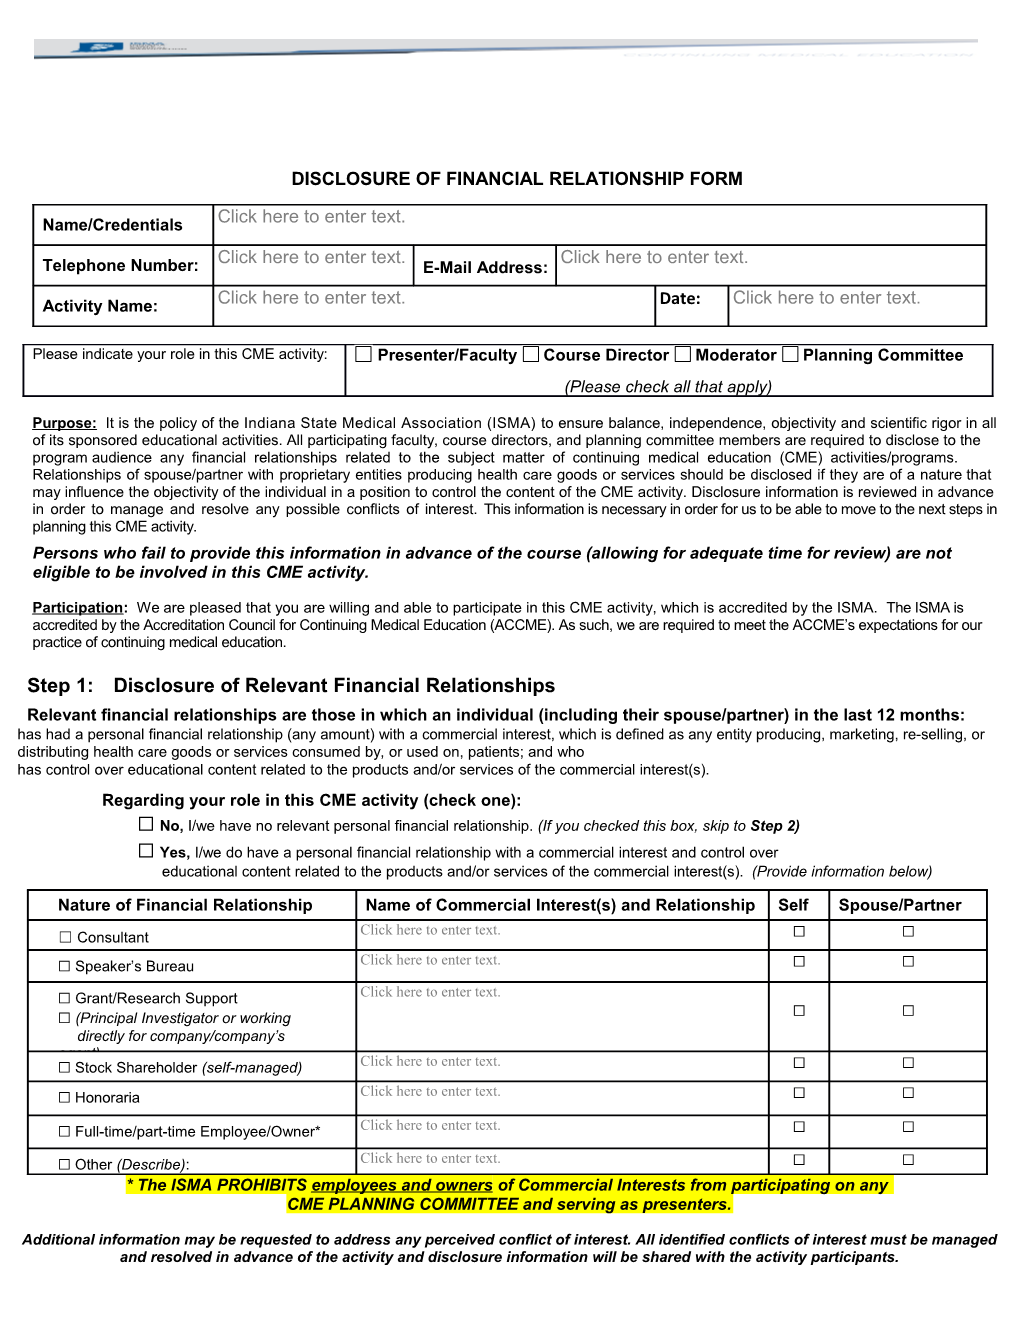 Disclosure of Financial Relationship Form